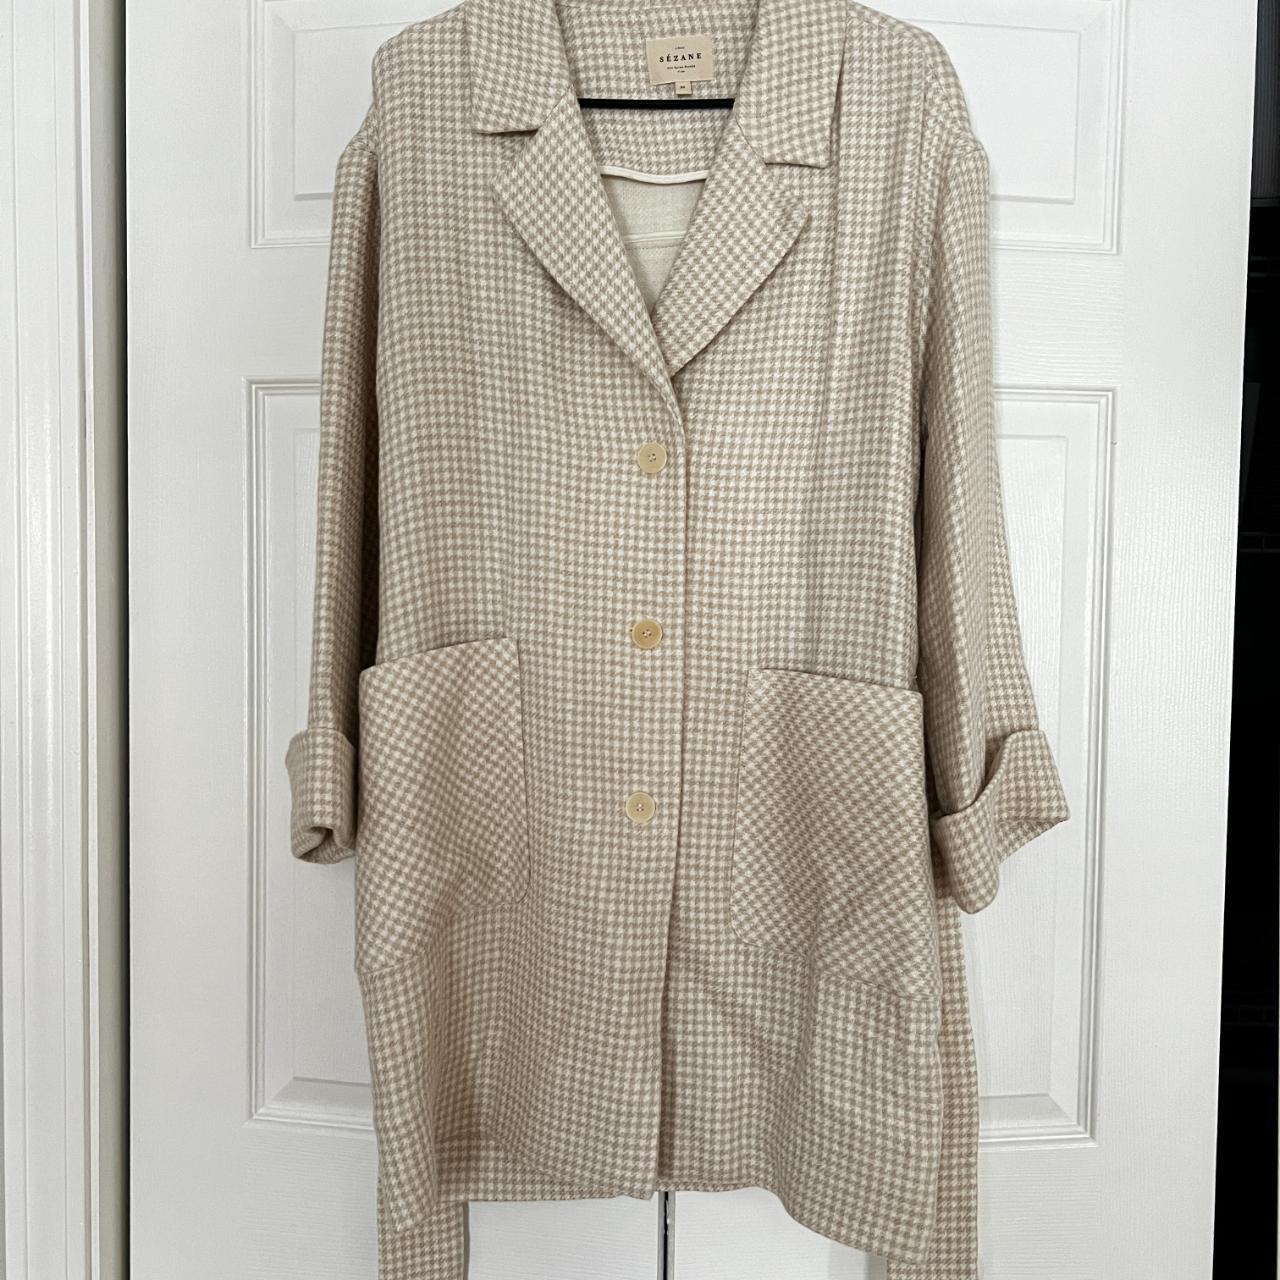 Sezane cream-colored plaid trench coat. This is a... - Depop